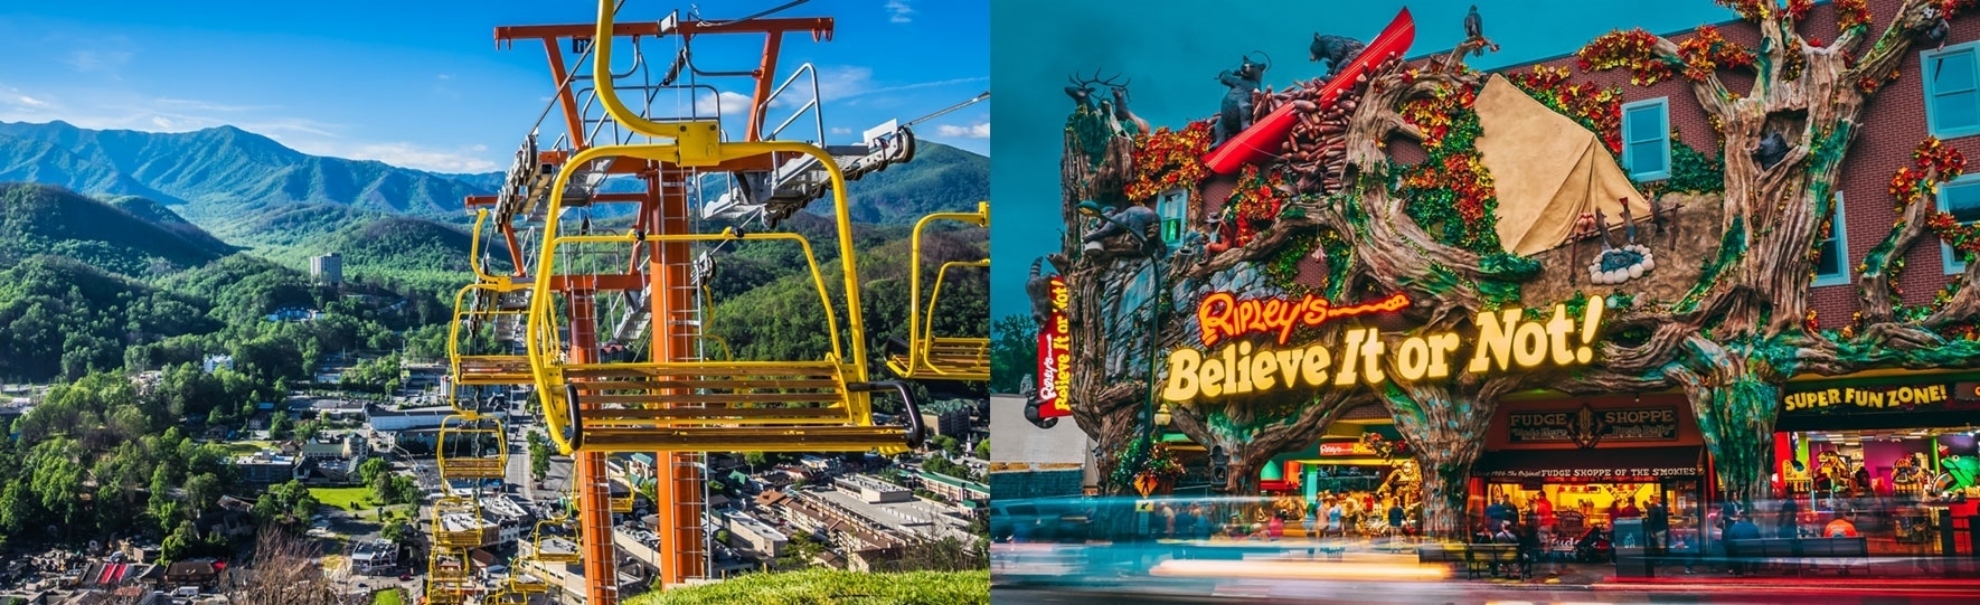 Picture of SkyPark + Ripley's Believe It or Not Combo